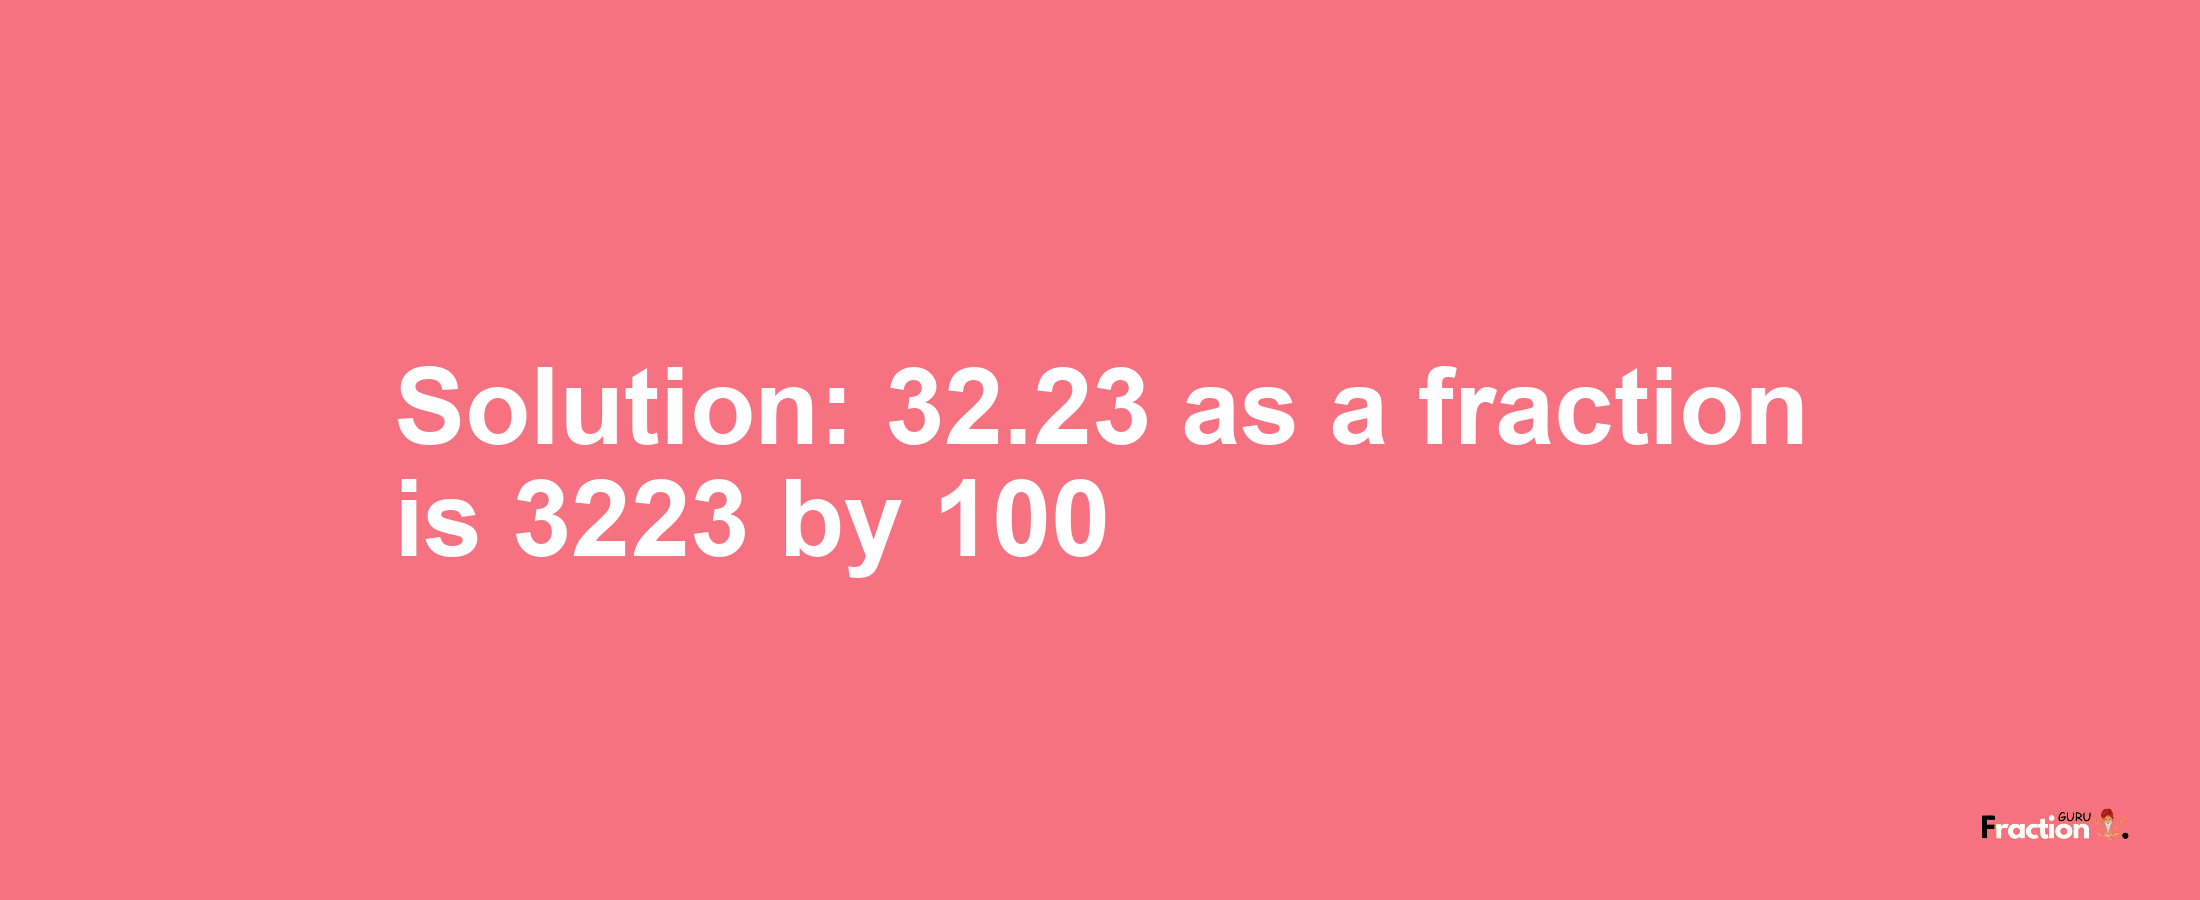 Solution:32.23 as a fraction is 3223/100